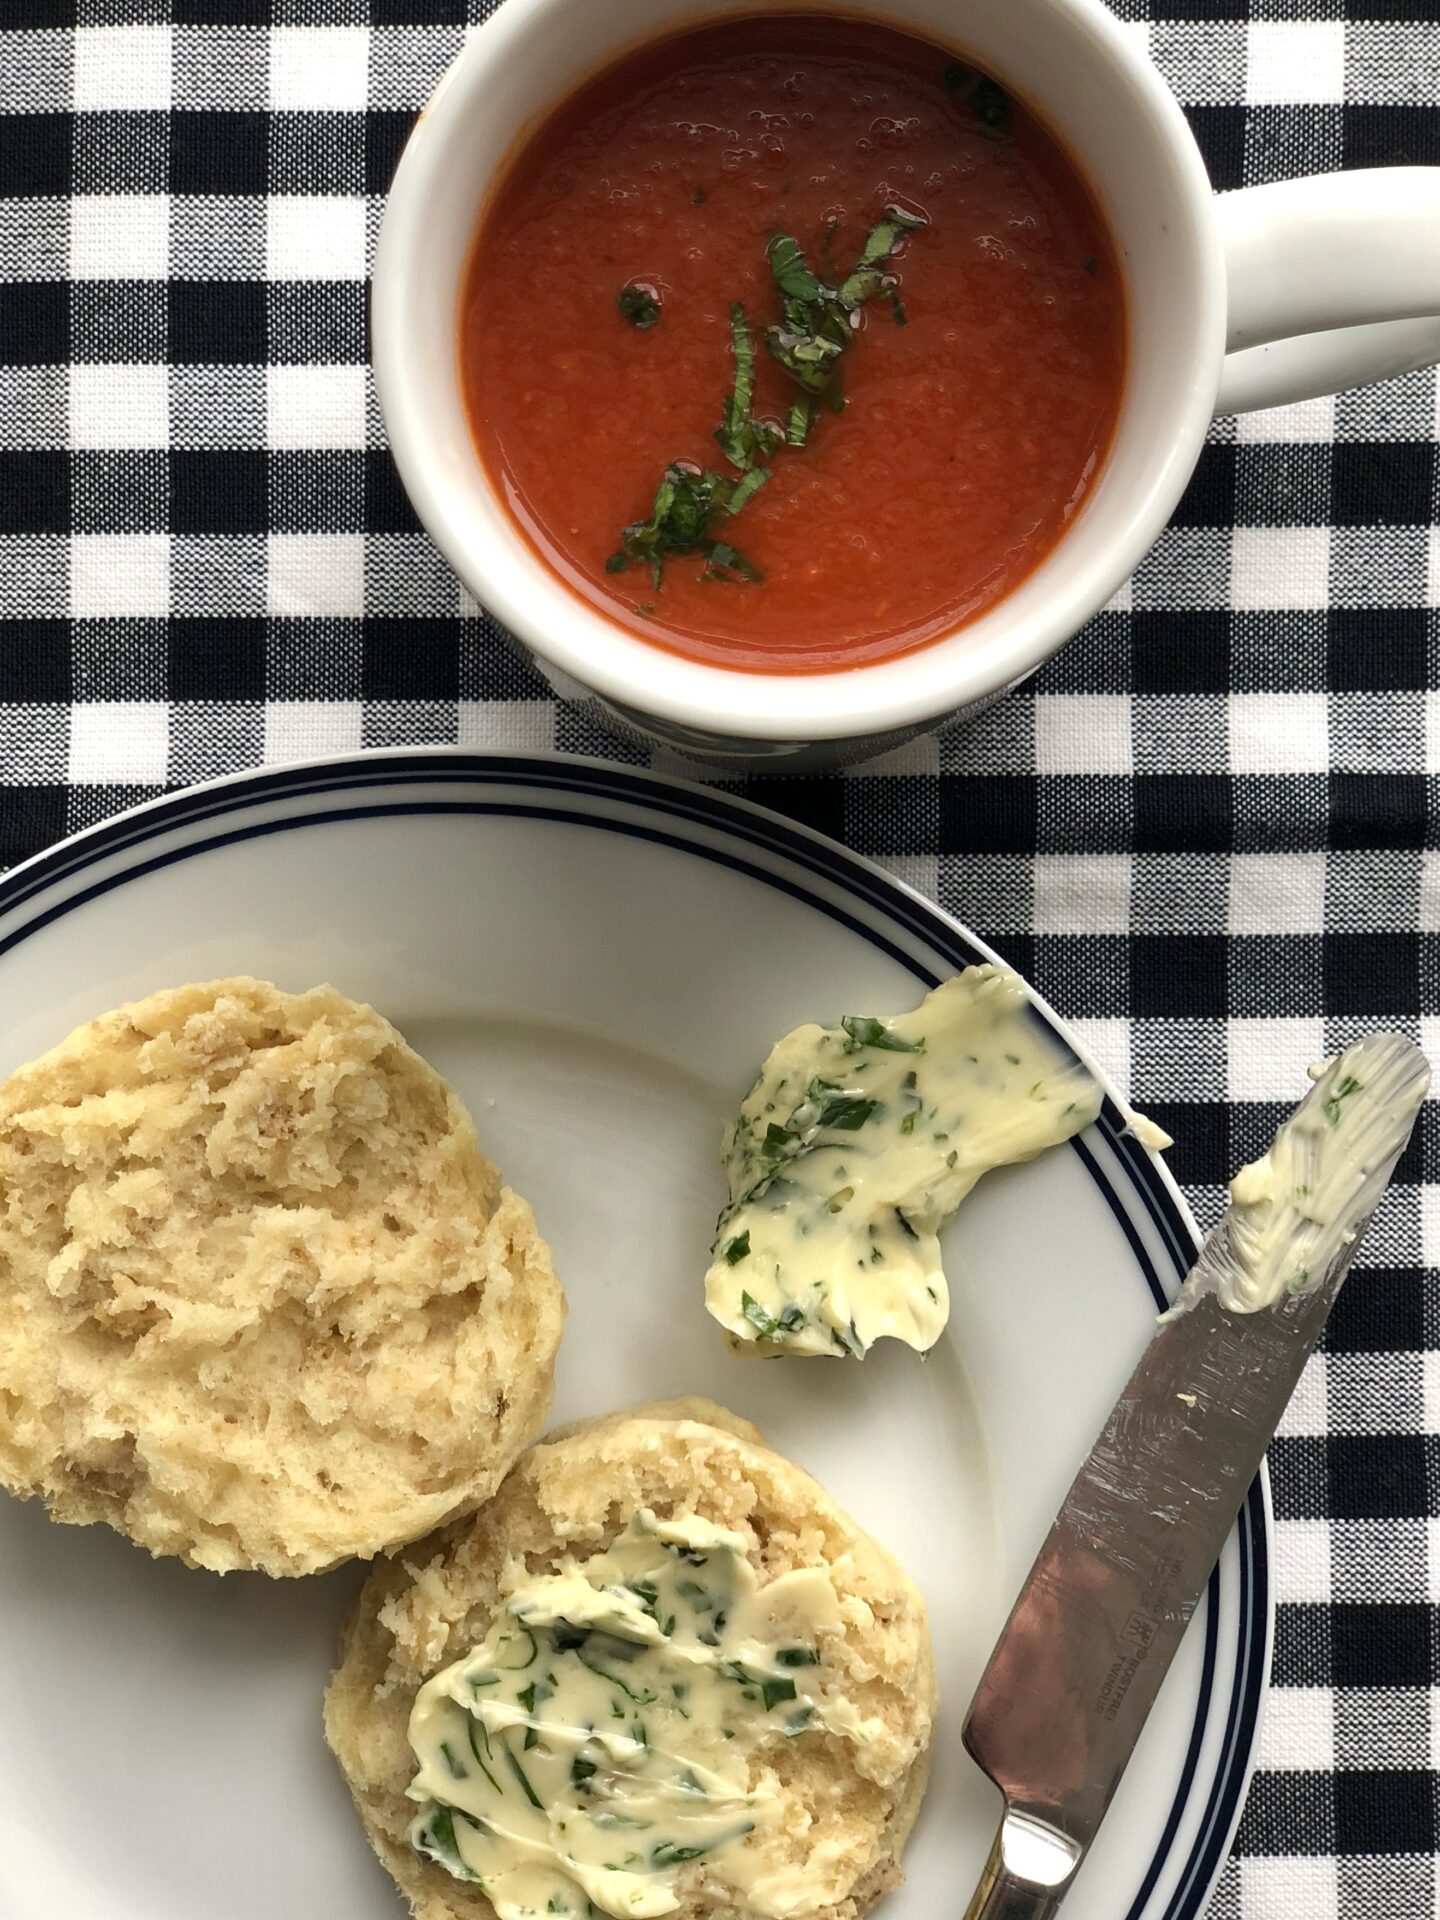 A mug of homemade tomato soup with a warm biscuit and herb butter